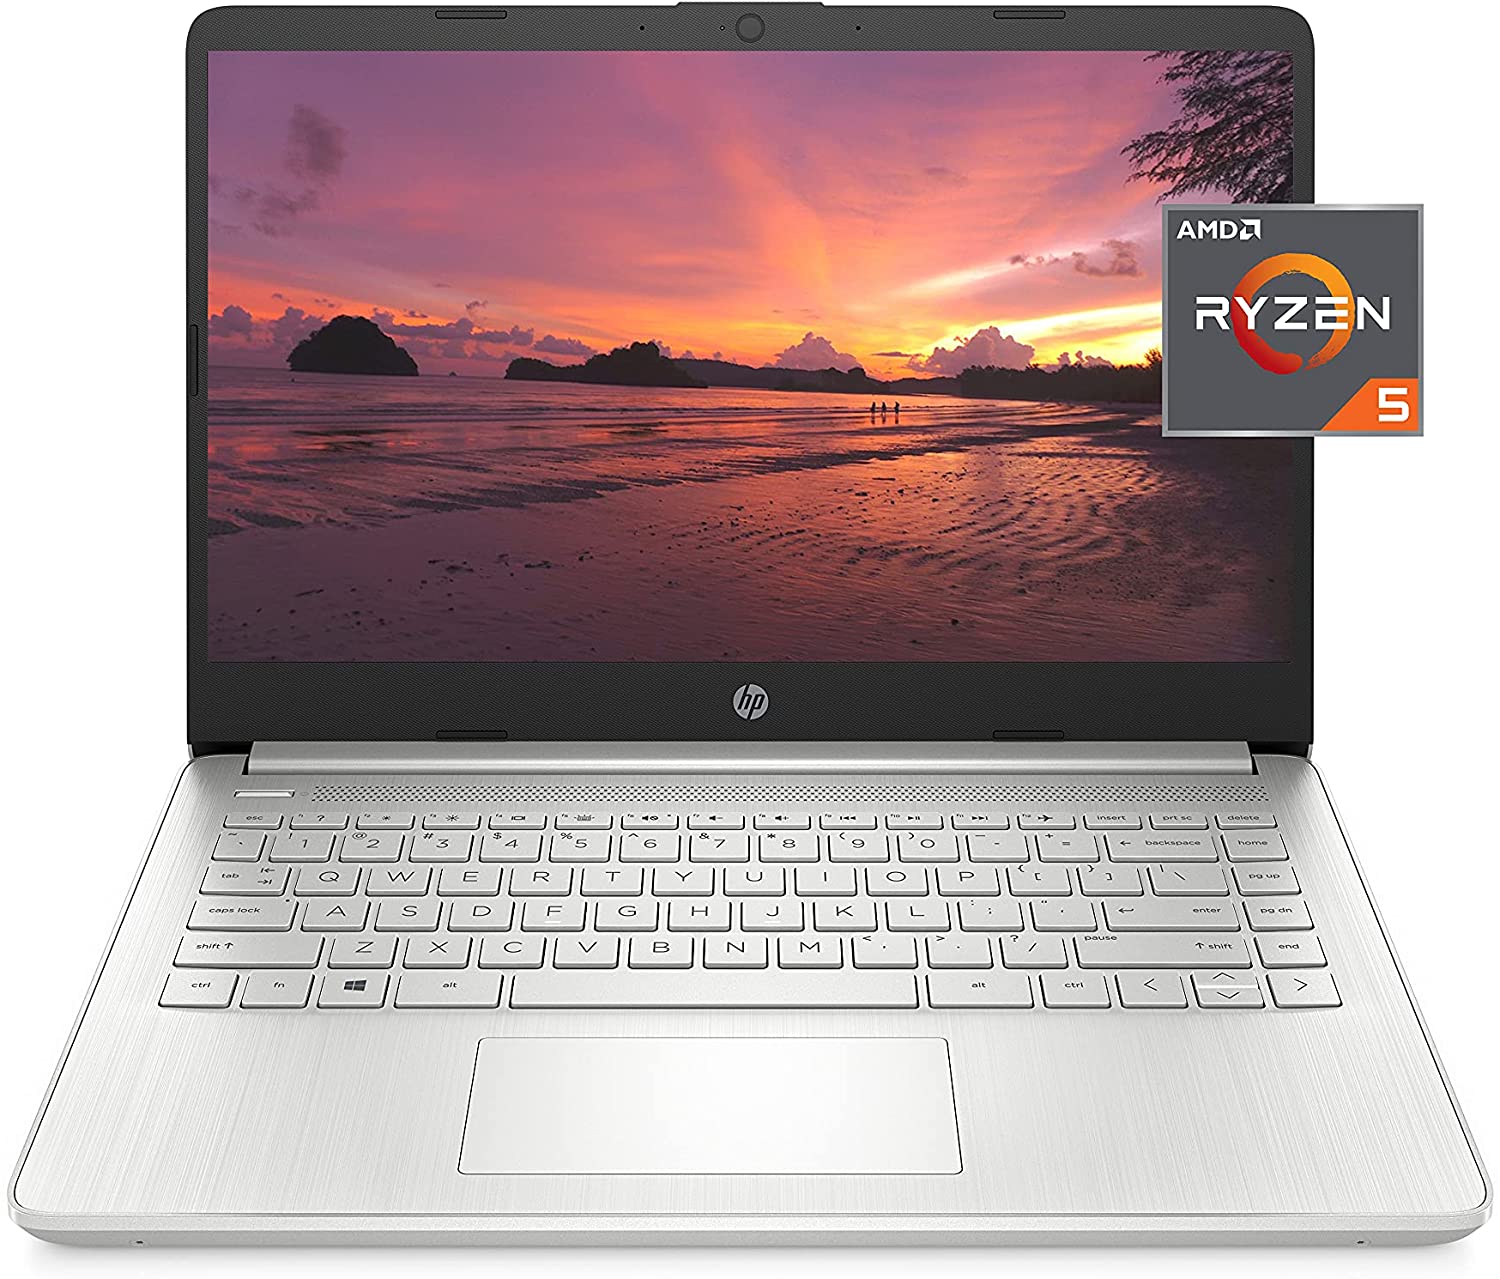 10 Best 14 Inch Laptop Under 500 In 2022 [Buying Guide]